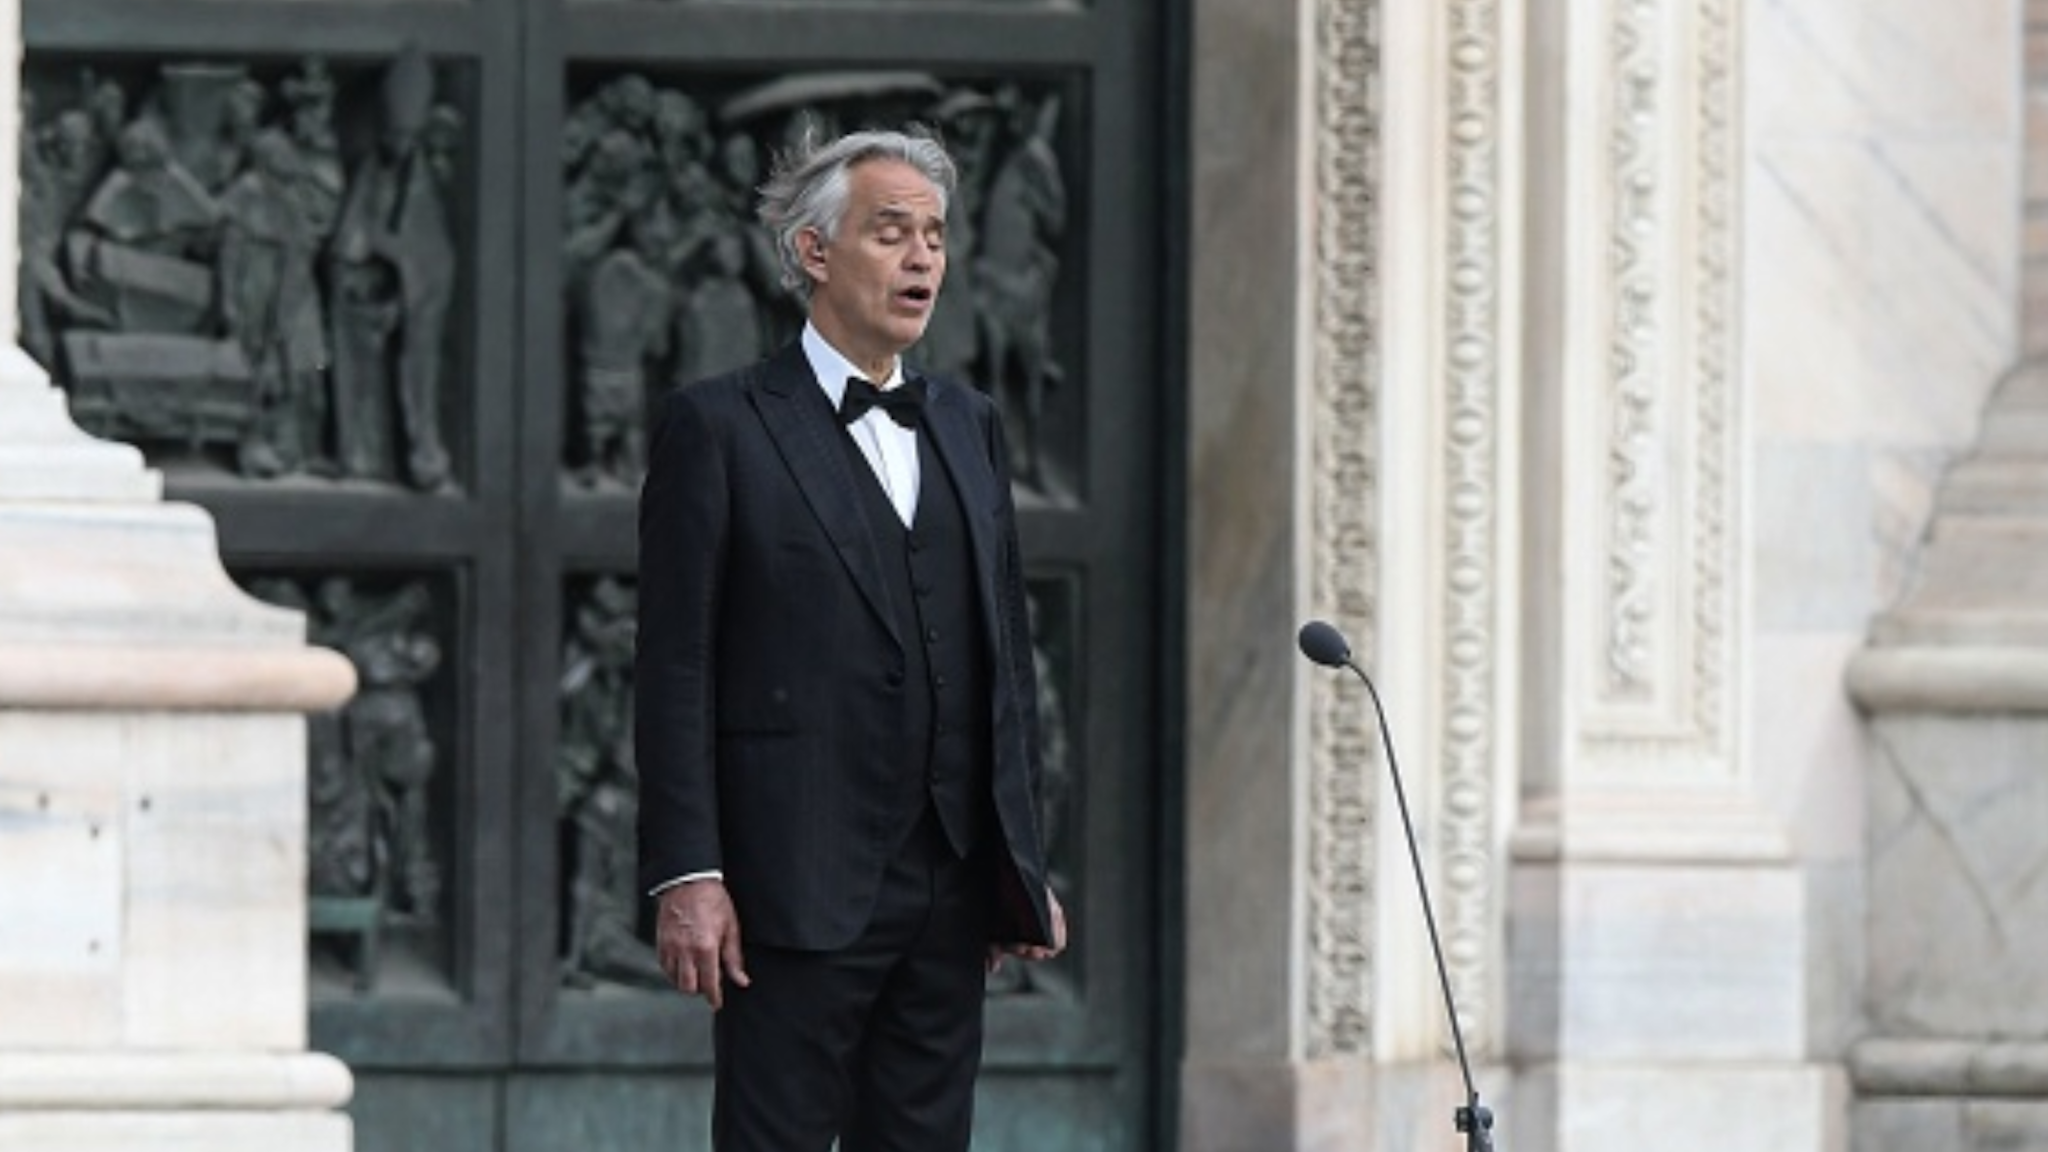 TOPSHOT - Italian tenor and opera singer Andrea Bocelli sings during a rehearsal on a deserted Piazza del Duomo in central Milan on April 12, 2020, prior to an evening performance without public for the world wounded by the pandemic, during the country's lockdown aimed at curbing the spread of the COVID-19 infection, caused by the novel coronavirus.